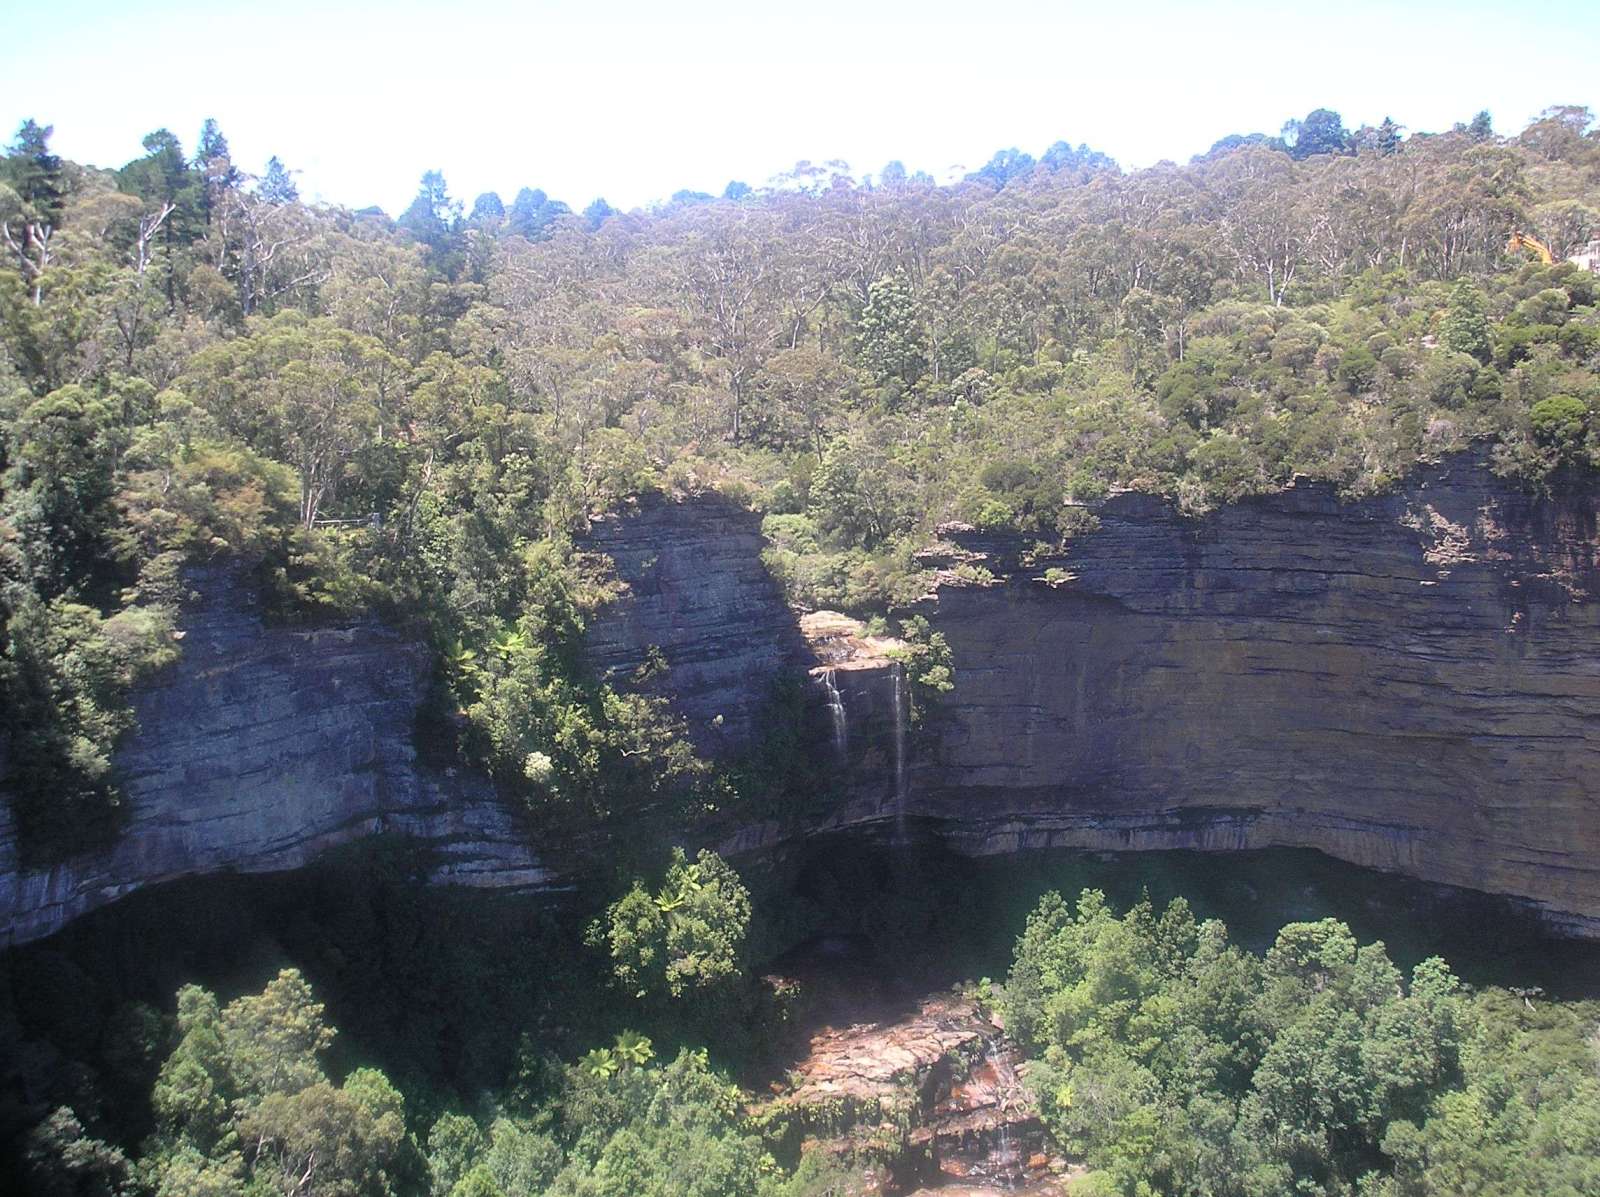 Train ride from Sydney to Katoomba and checking out the Blue Mountains